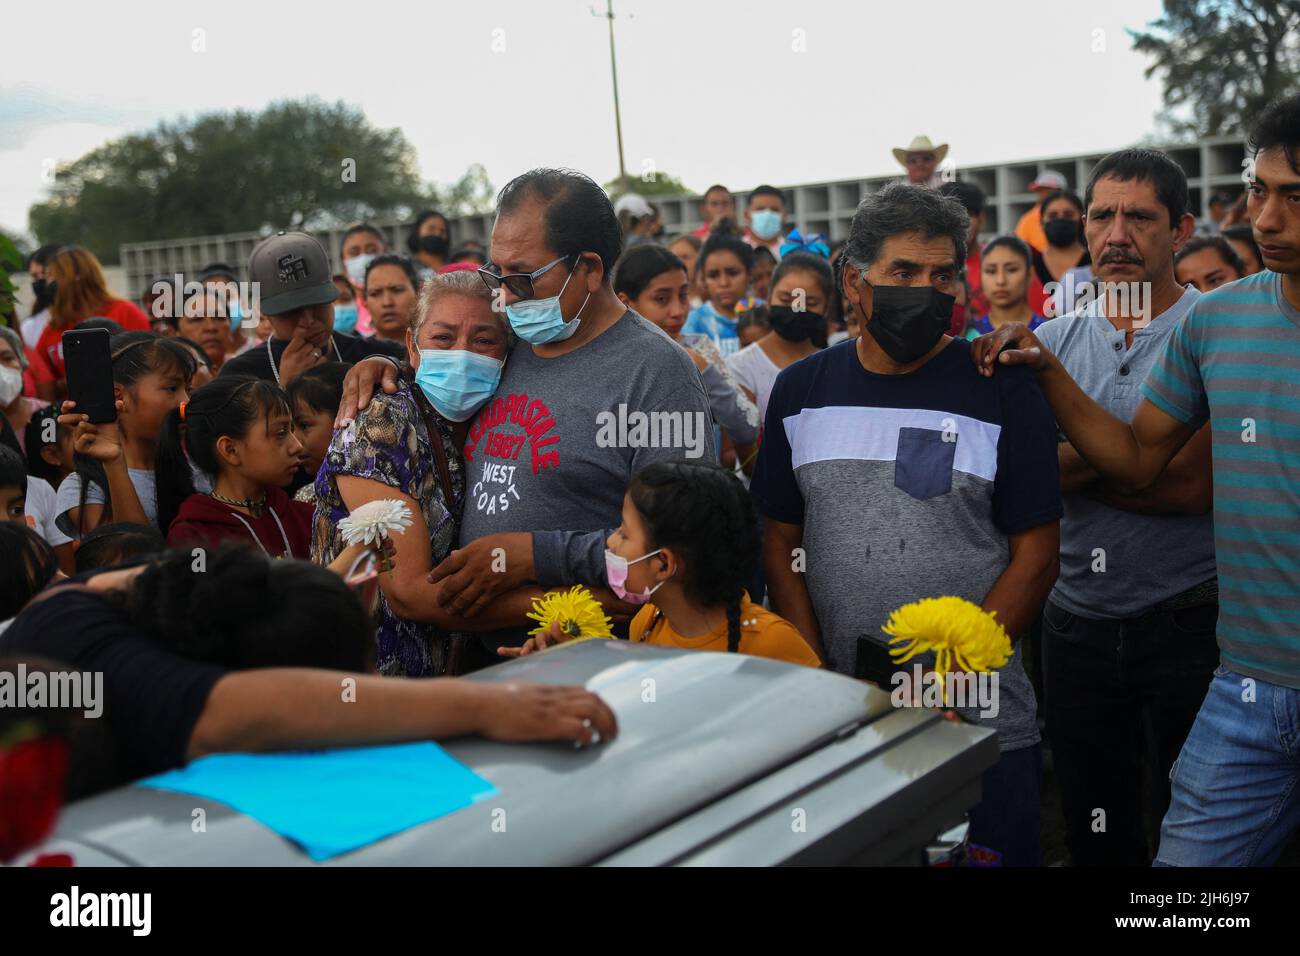 Relatives and friends of late migrant Jose Lopez, 34, who died in a trailer truck in Texas attend his funeral after his remains were repatriated to Mexico, in Celaya, Guanajuato state, Mexico, July 15, 2022. REUTERS/Edgard Garrido Stock Photo